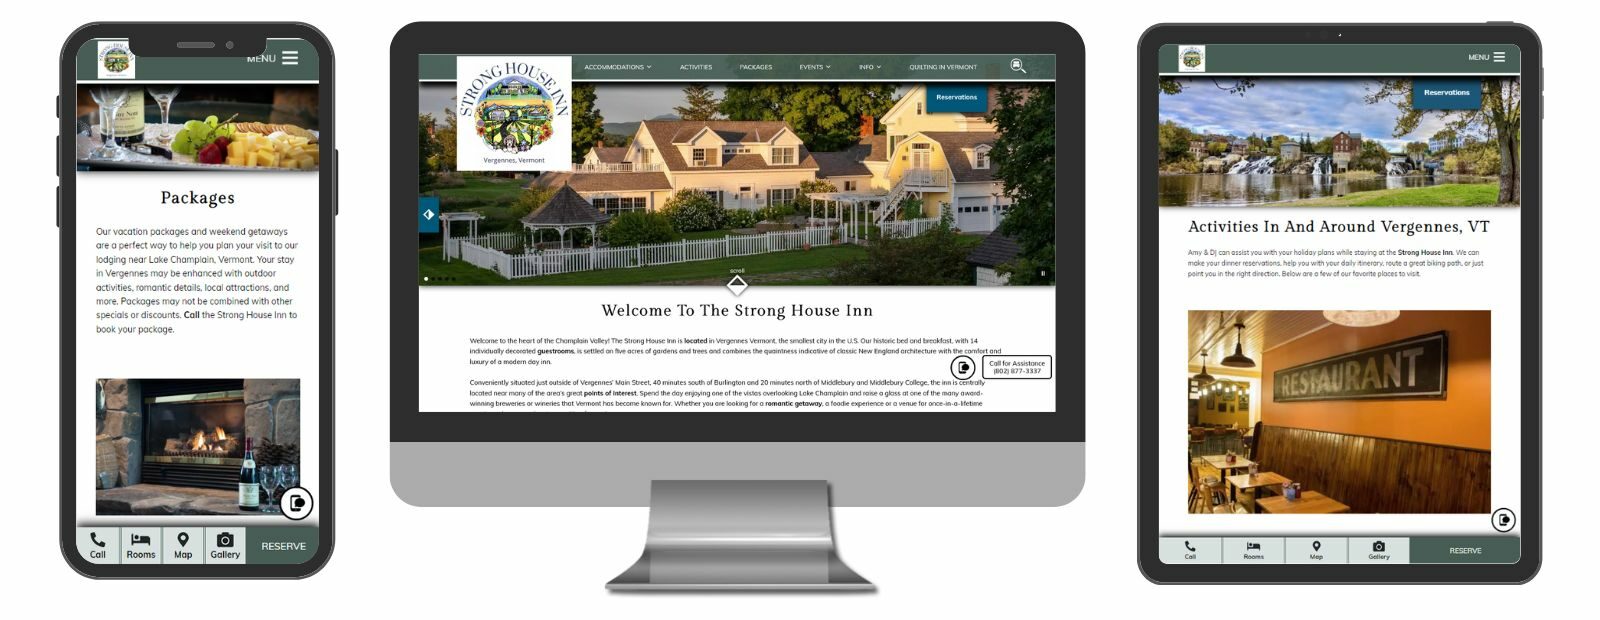 Screenshot of Desktop, Mobile and tablet views of the website for Strong House Inn